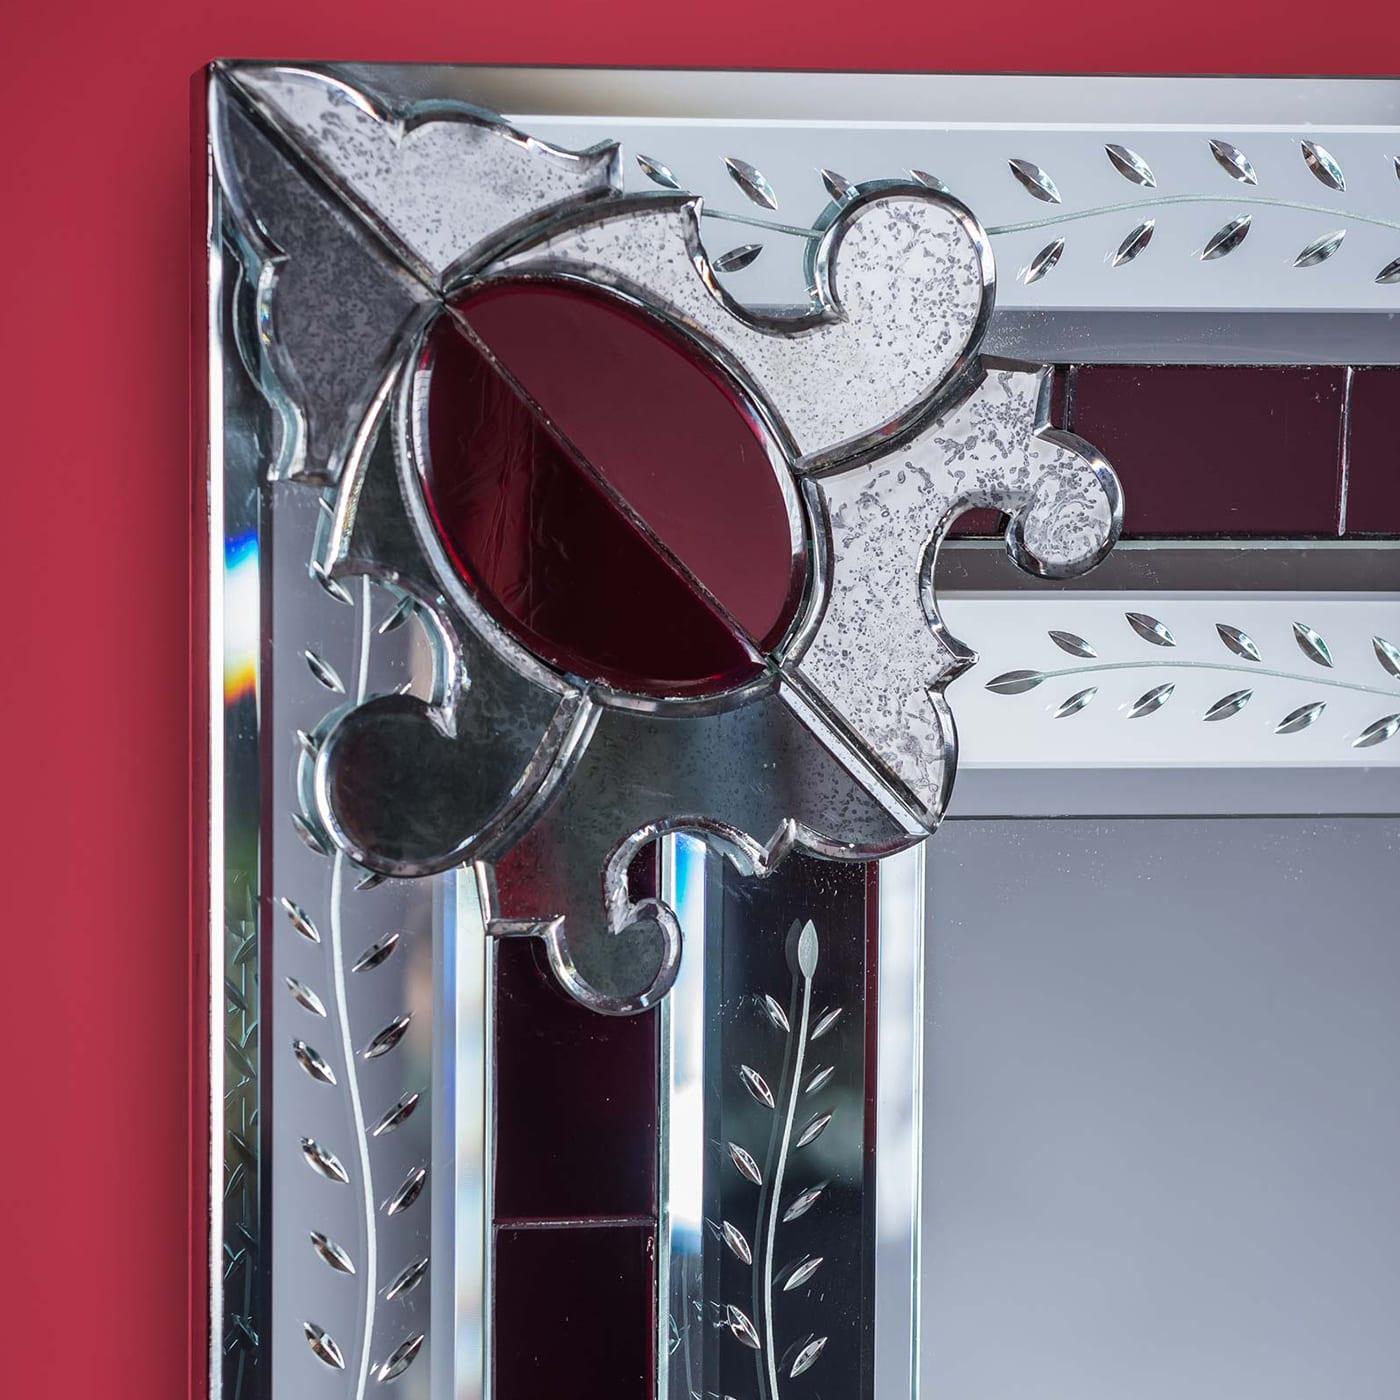 Magnificent rectangular mirror composed of beveled and silvered mirror embroideries in the corners, all handmade with bands engraved with a floral subject, on a red Murano glass mirror background. This miniature reproduction of a larger mirror is